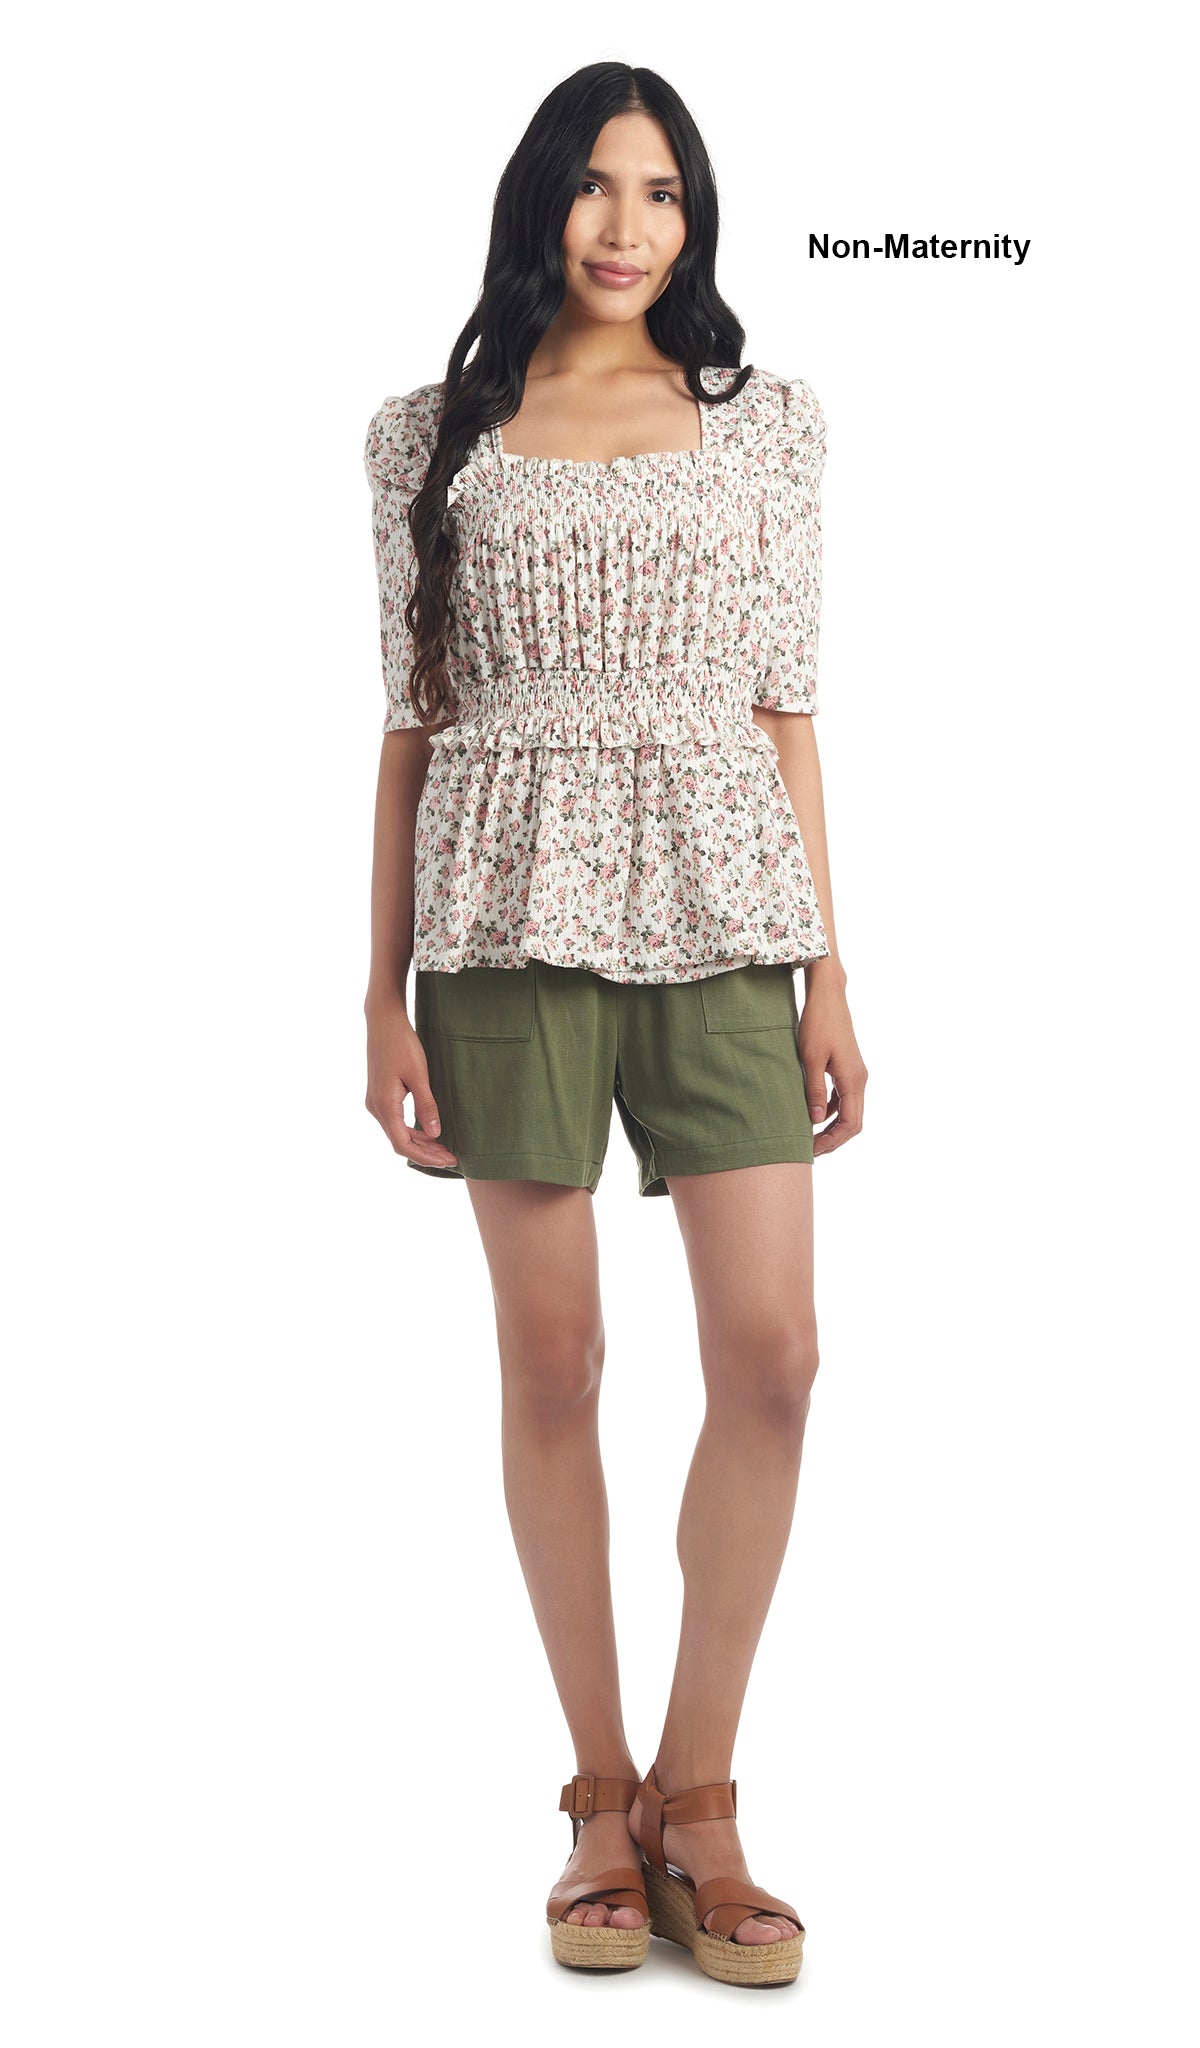 Ivory Floral Tracey top worn by woman as non-maternity style with olive shorts.